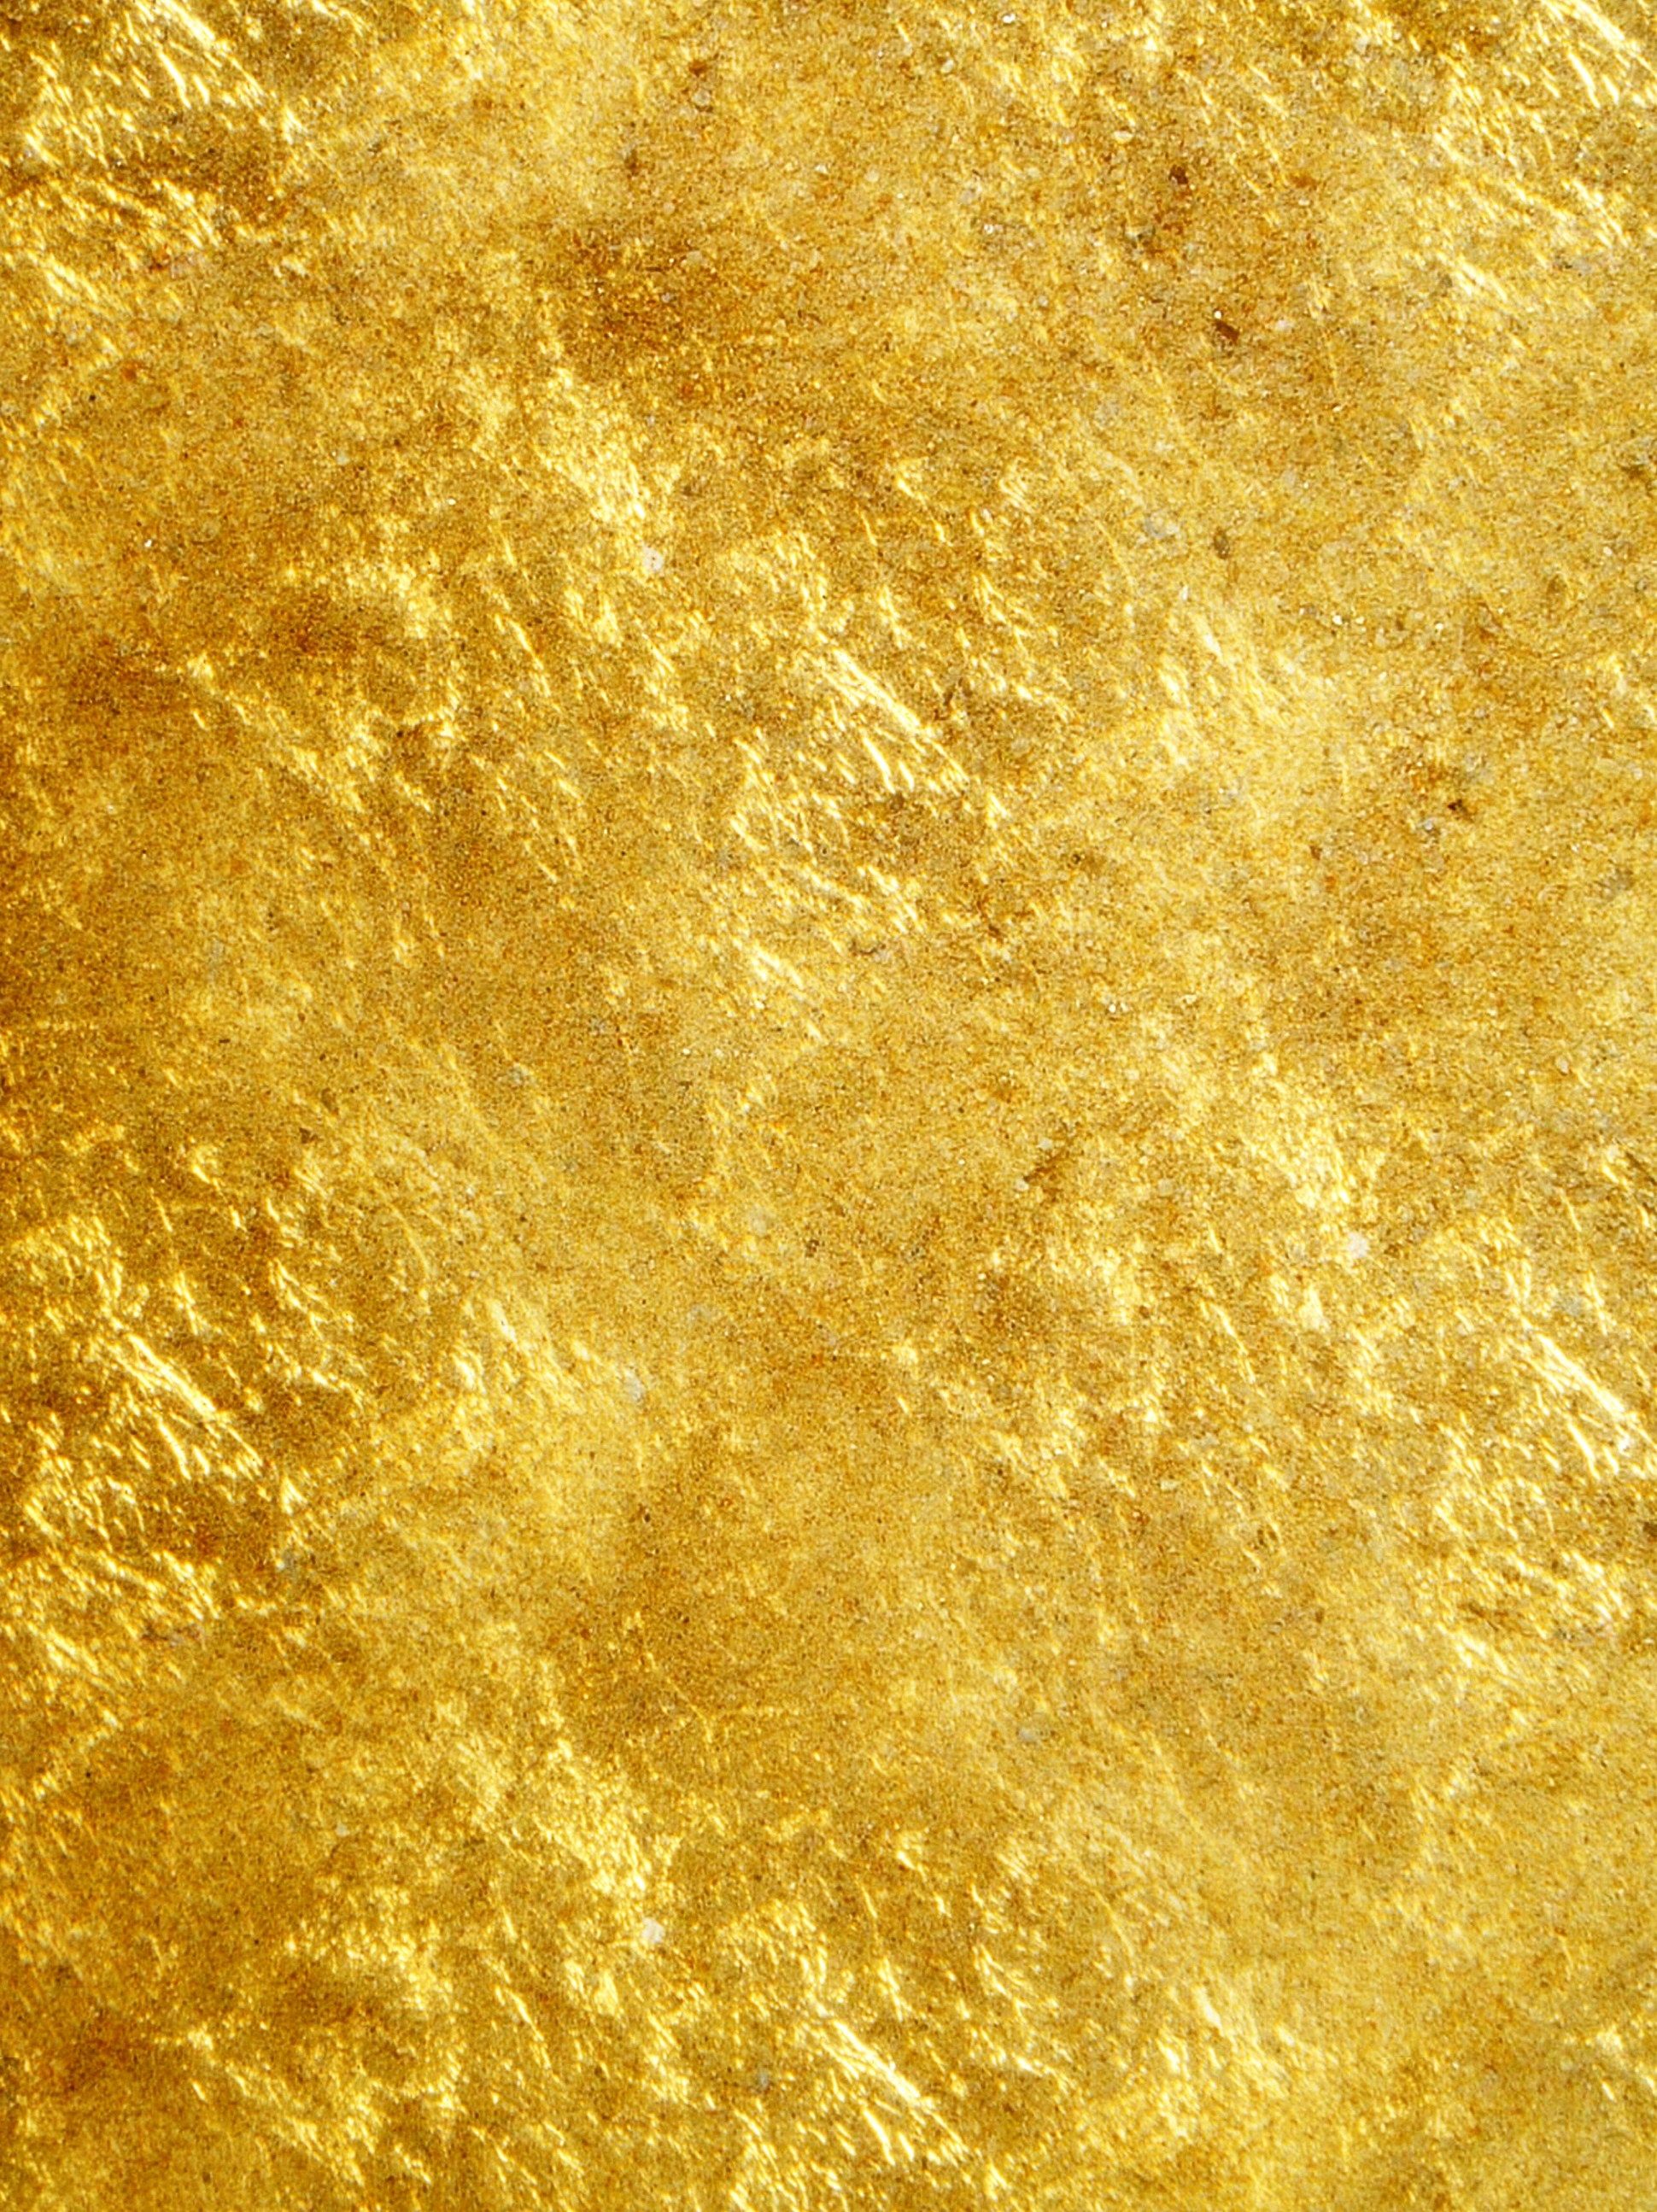 Gold color aesthetic Wallpaper Download